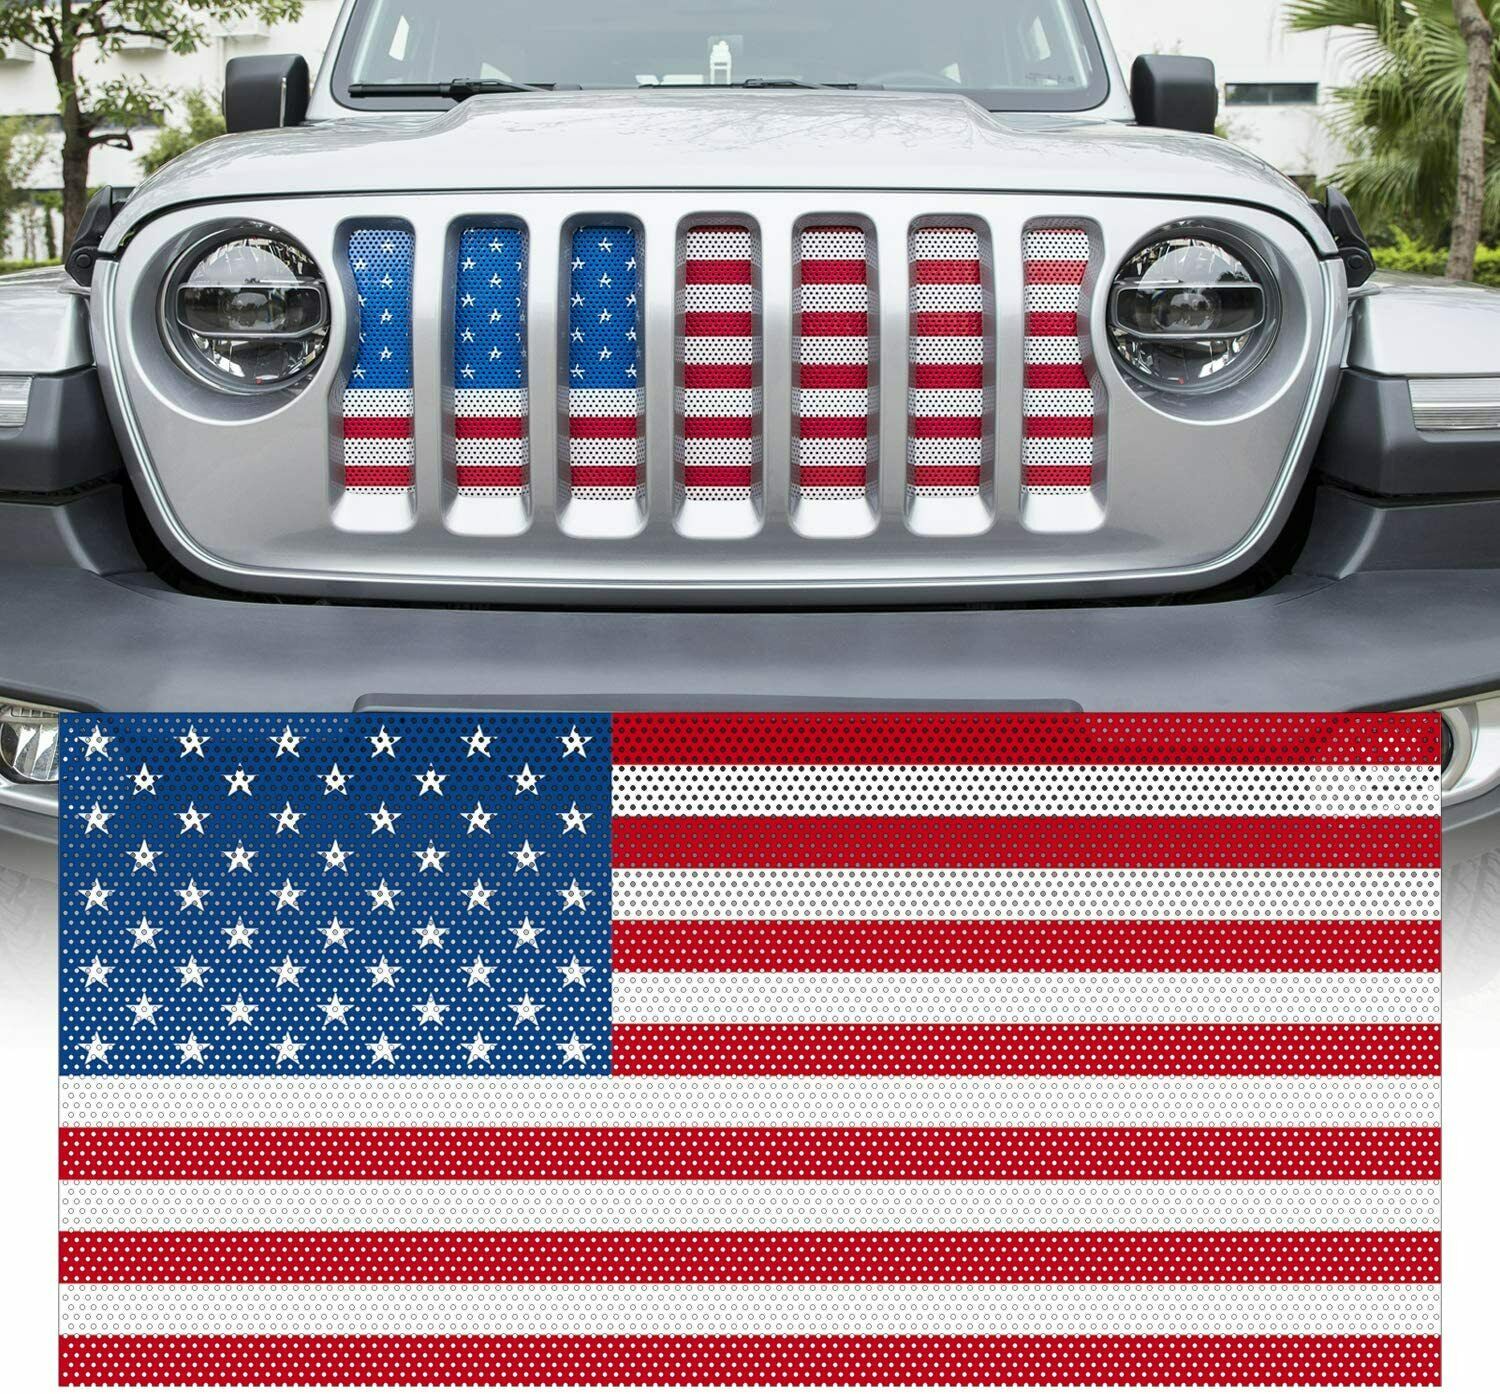 US Flag Front Grid Grille with Screen Insert for Jeep Wrangler 2018-2020  from Weathers Auto Supply